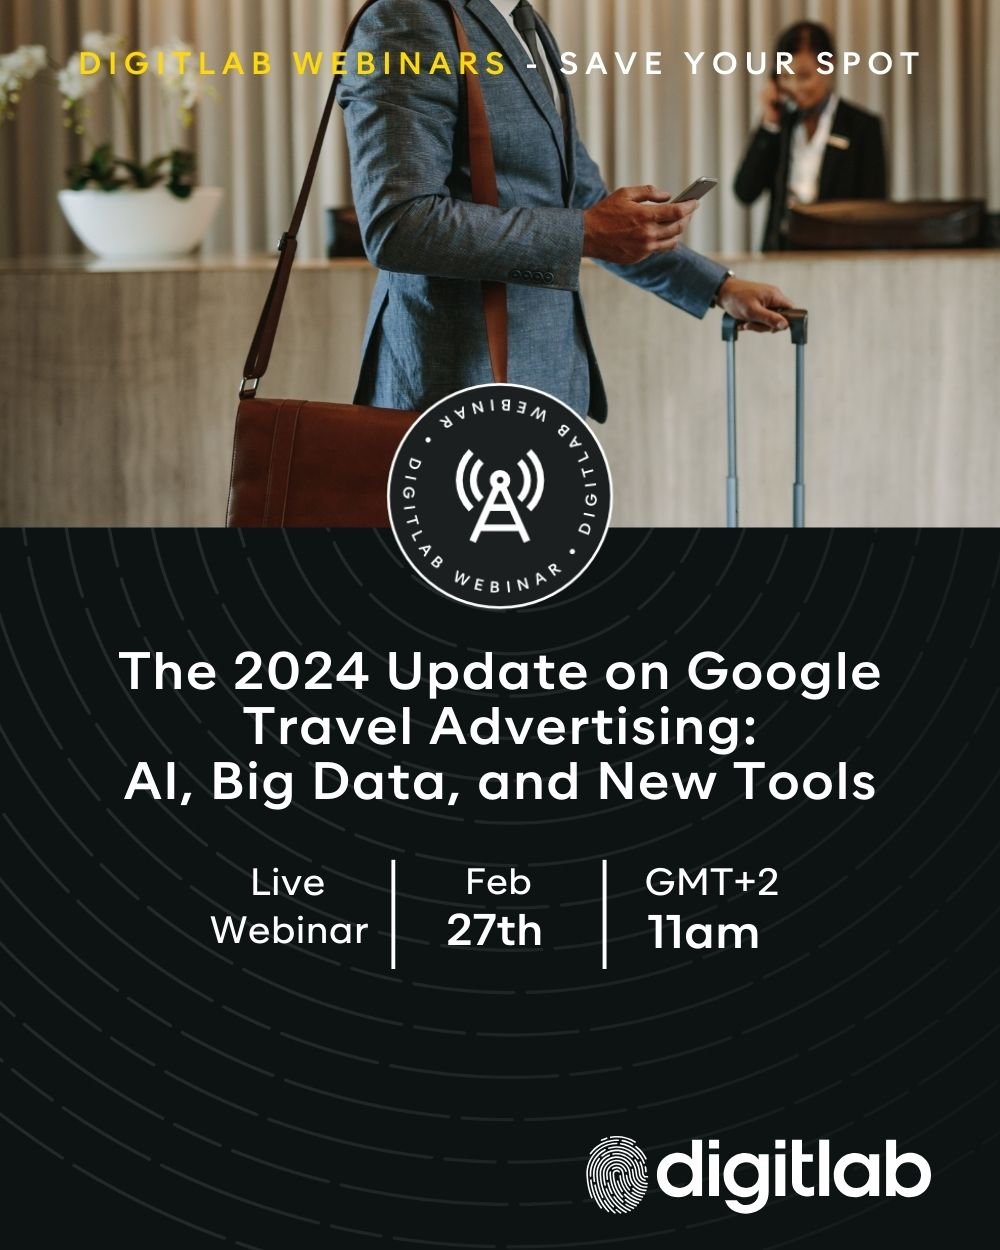 The 2024 Update on Google Travel Advertising- AI, Big Data, and New Tools 2